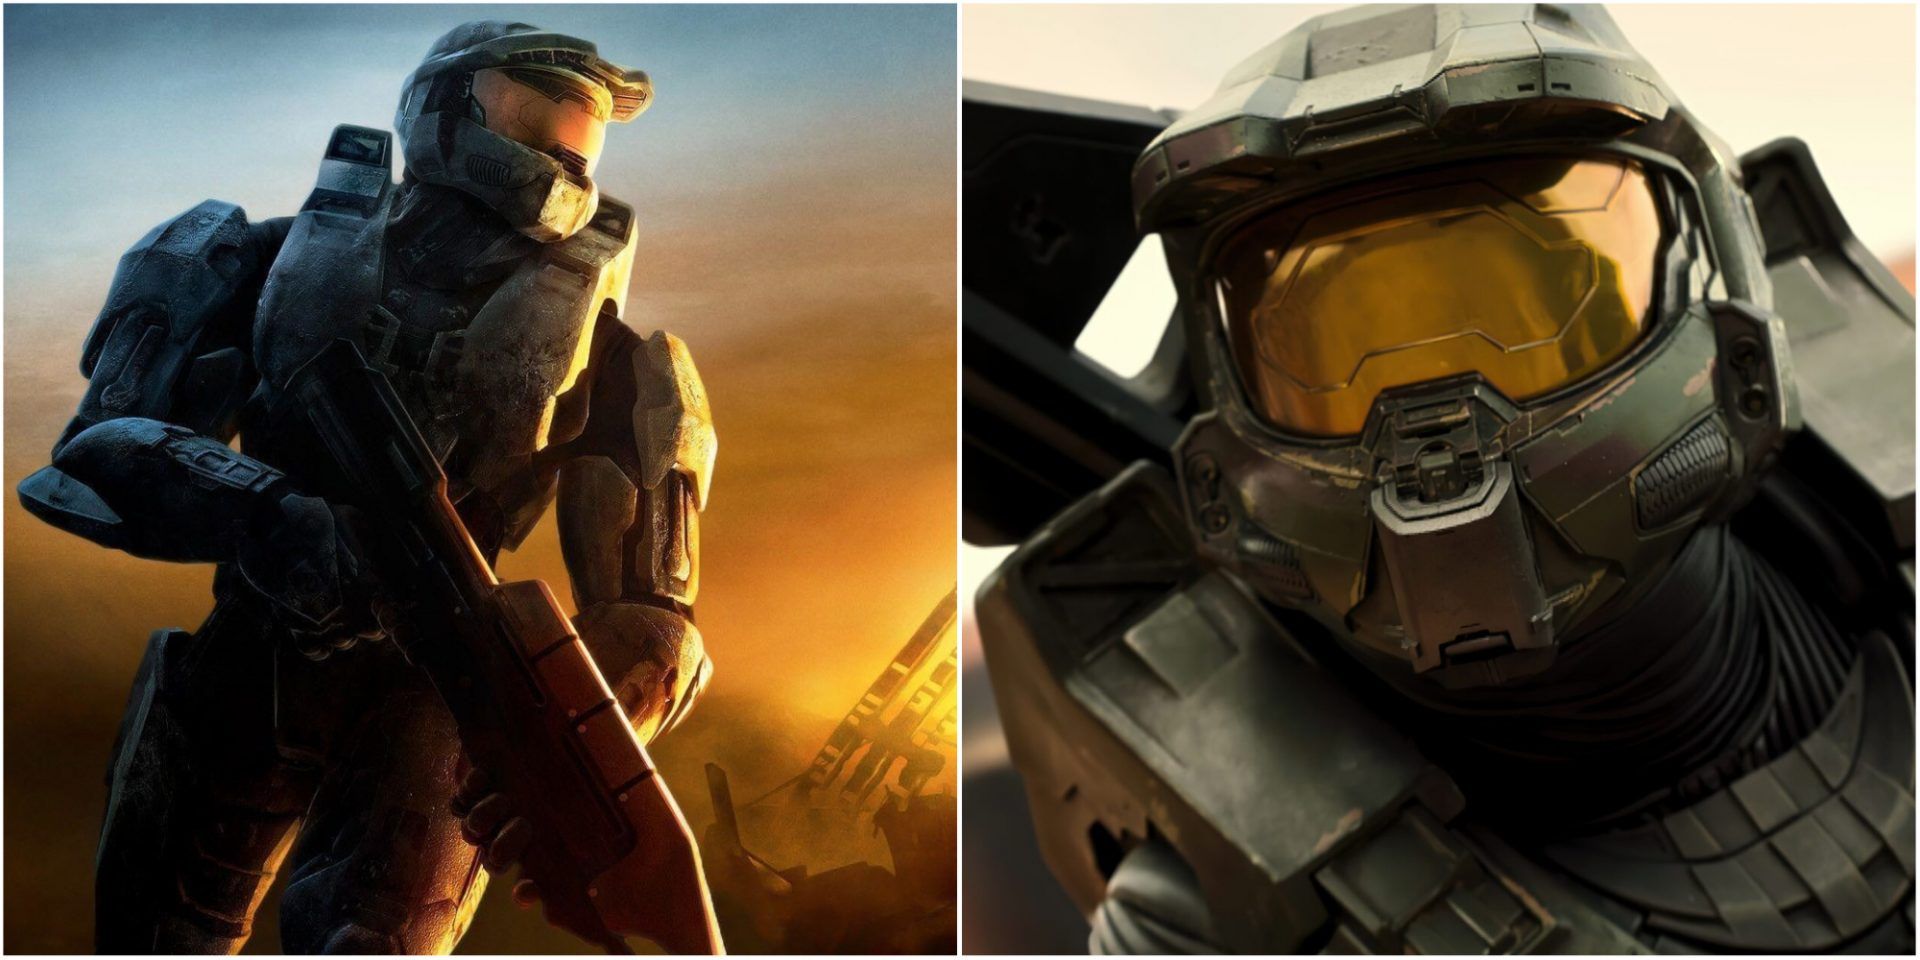 10 Biggest Differences Between The Halo Games And TV Series